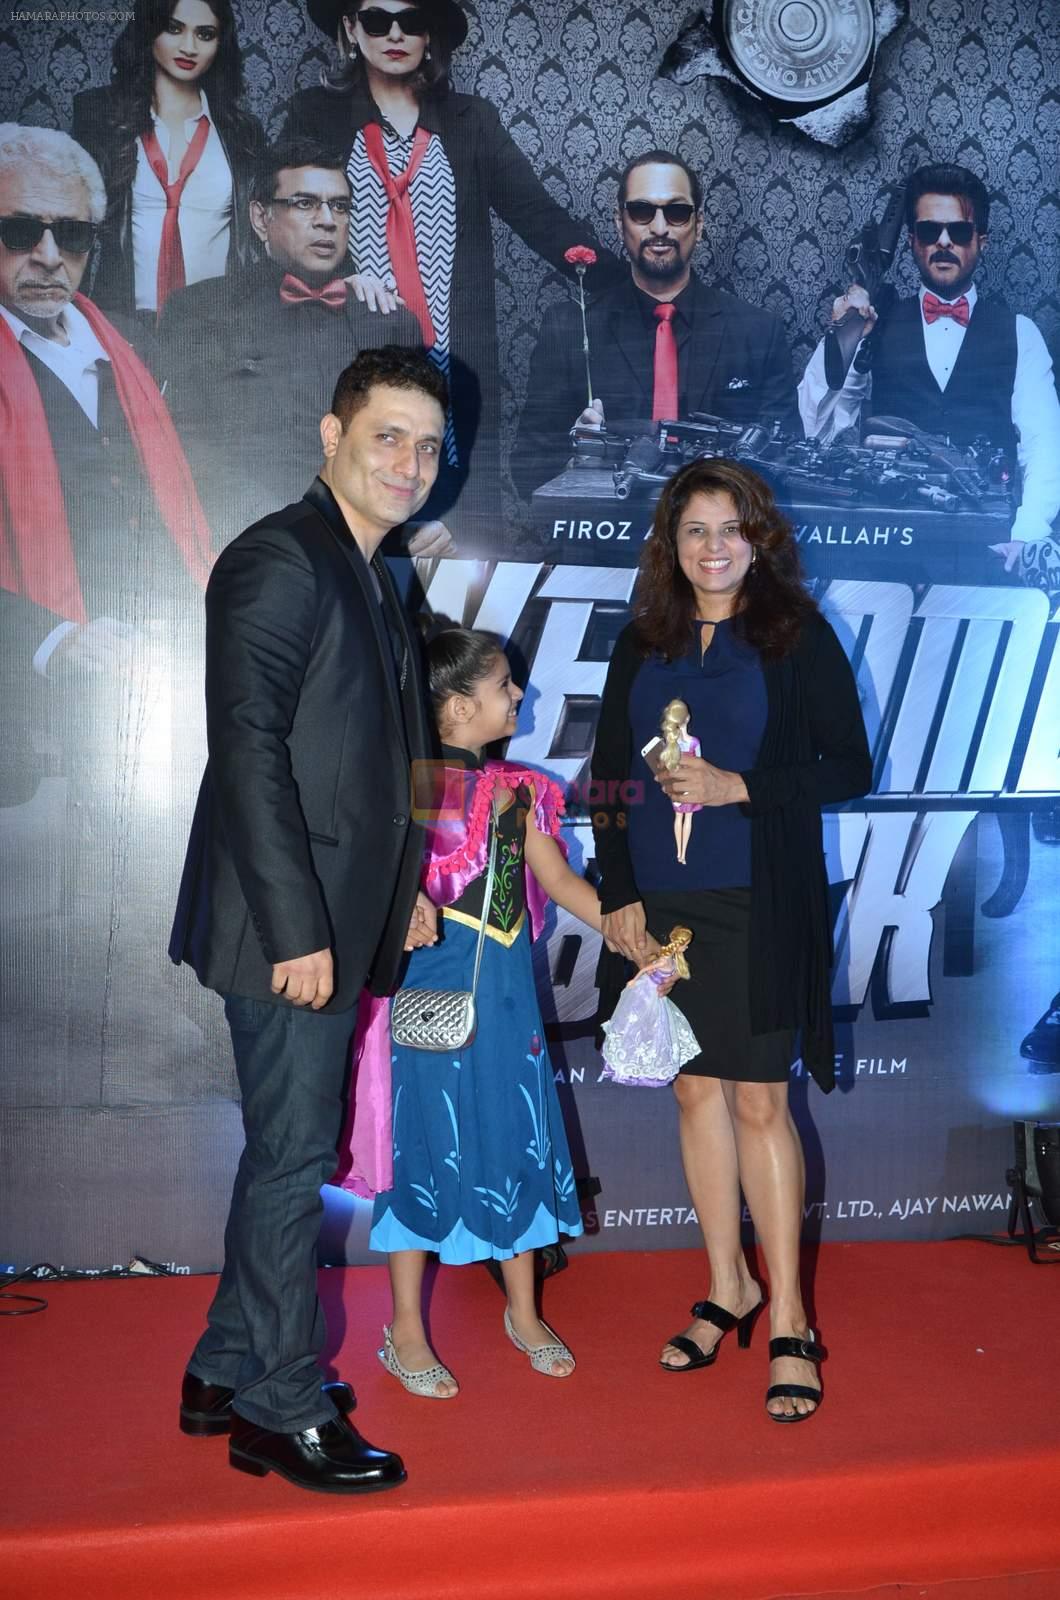 Shiney Ahuja at welcome back premiere in Mumbai on 3rd  Sept 2015